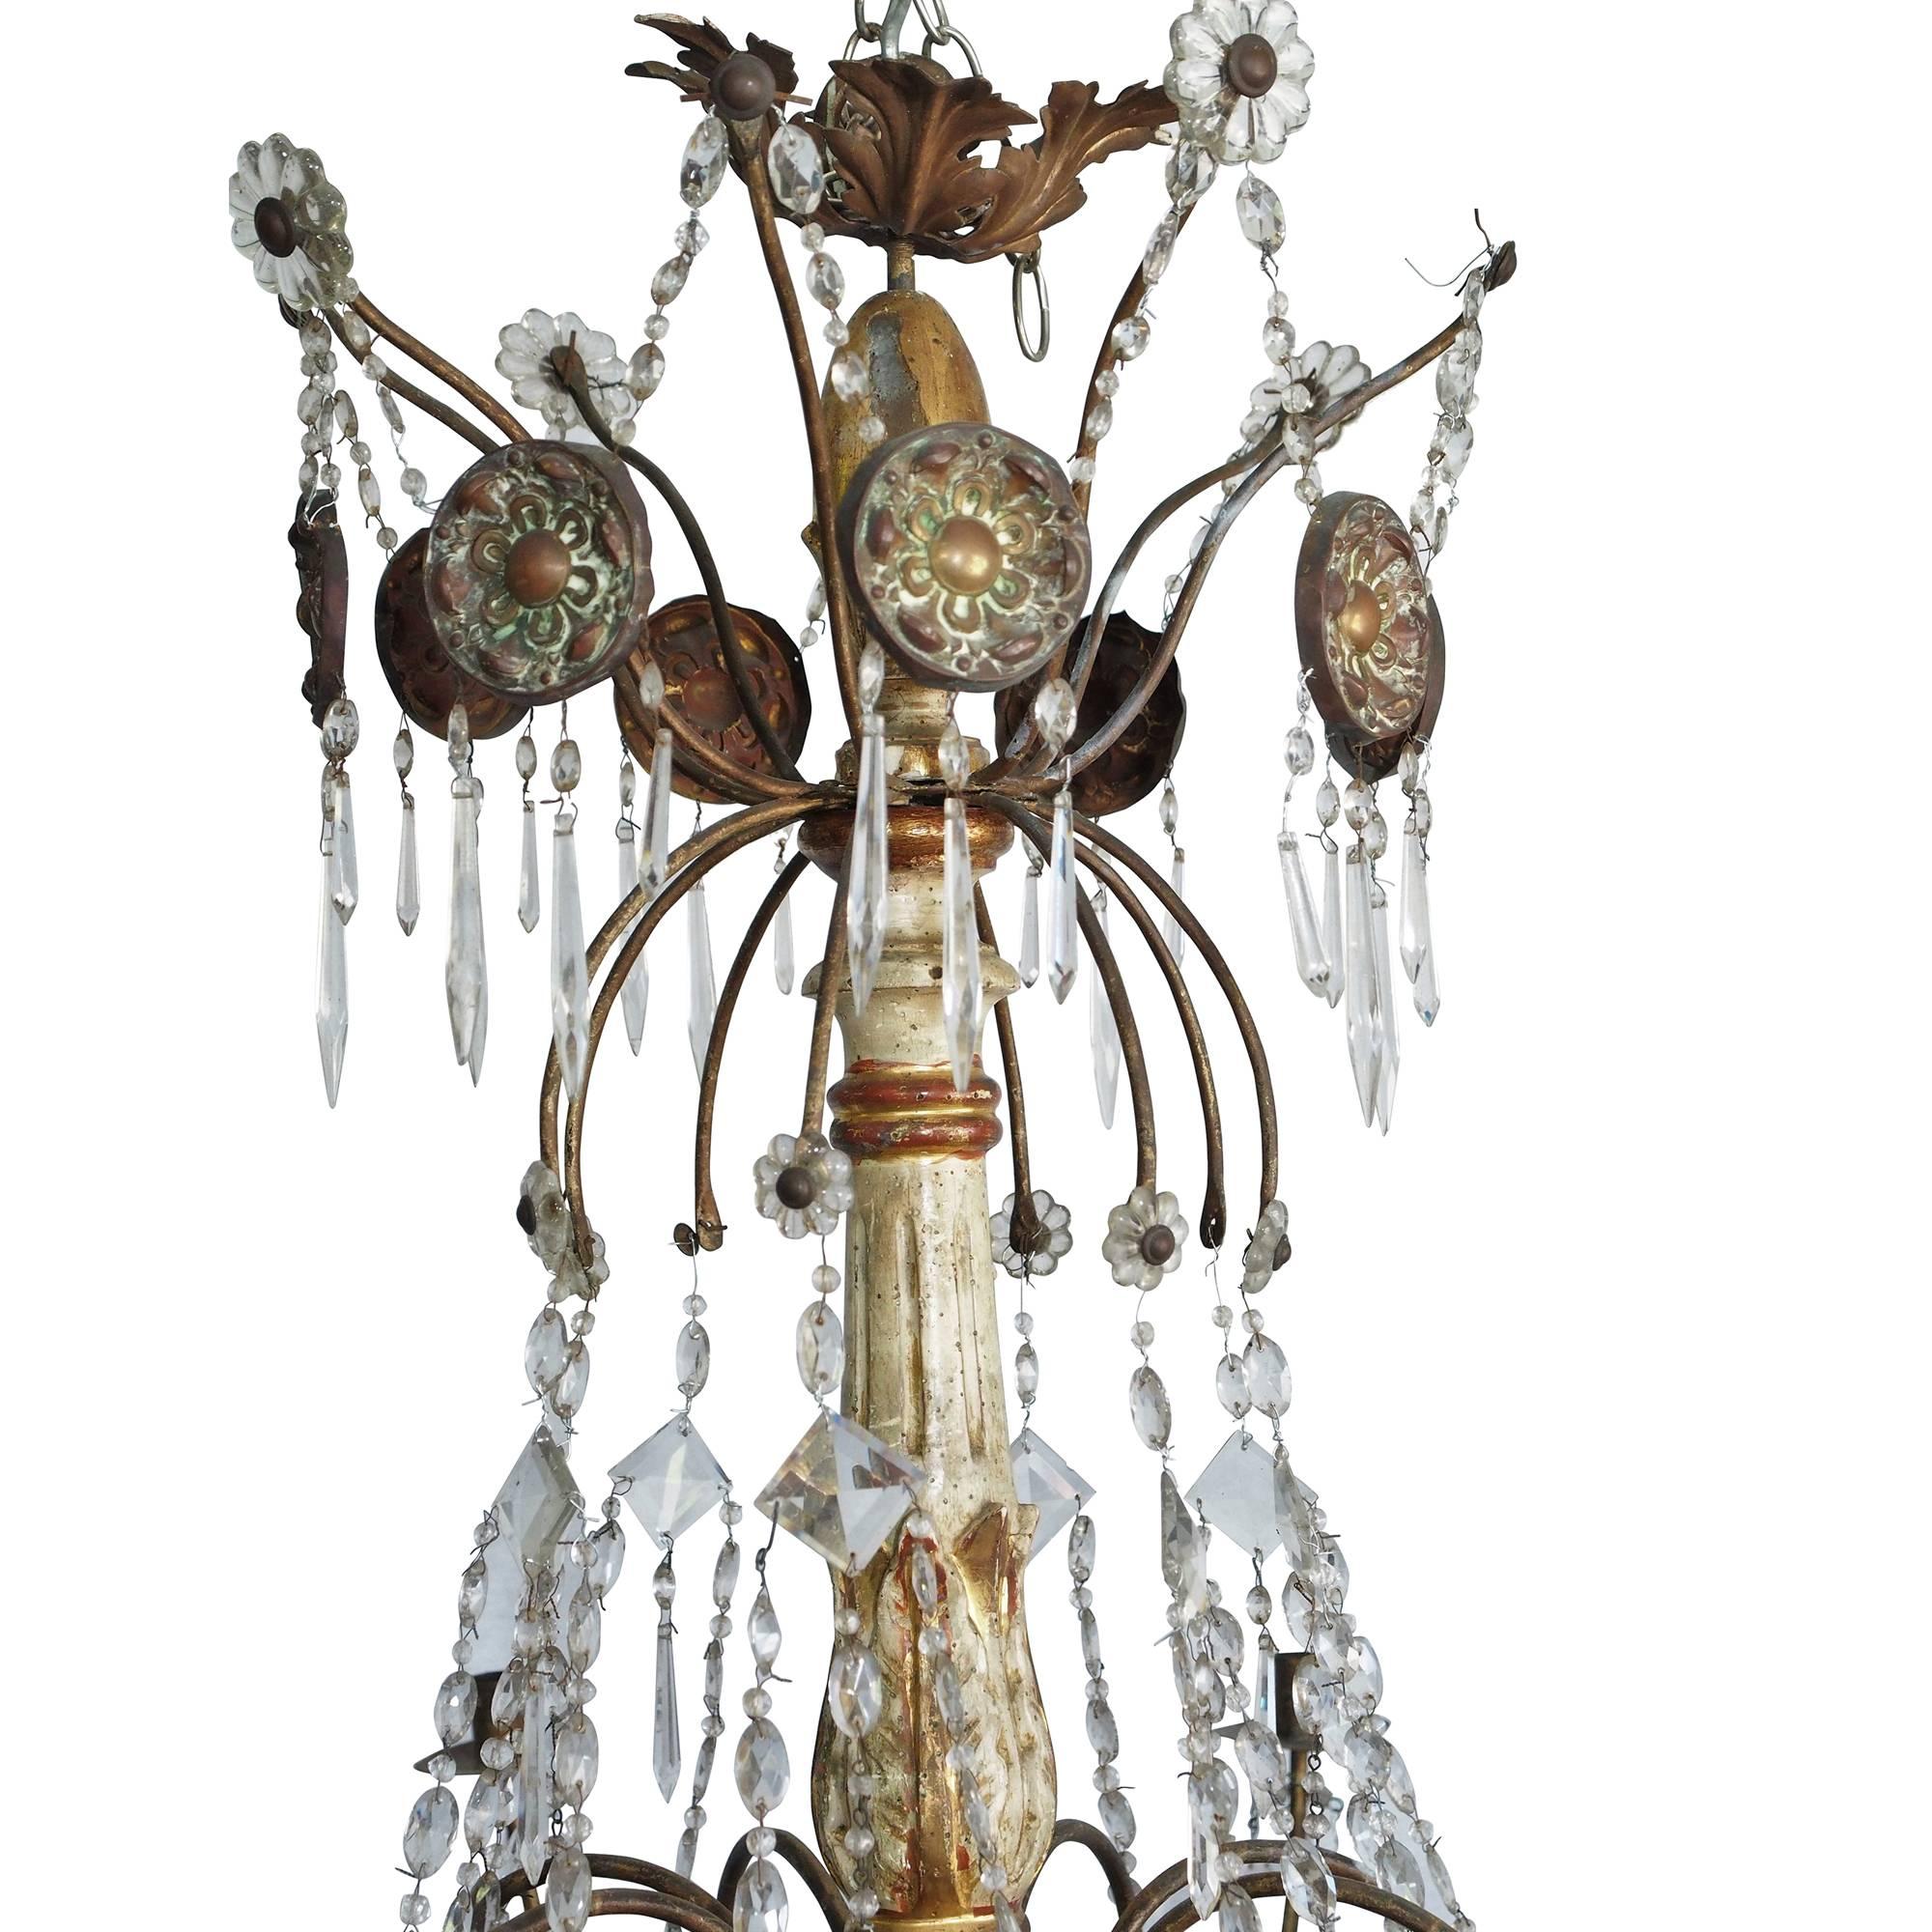 Tara Shaw Antiques - Gorgeous 18th century Italian crystal chandelier with a painted and gilded stem. Floral accents adorn the top of this unique and glamorous piece of lighting, dripping in a multitude of varied shaped crystals.